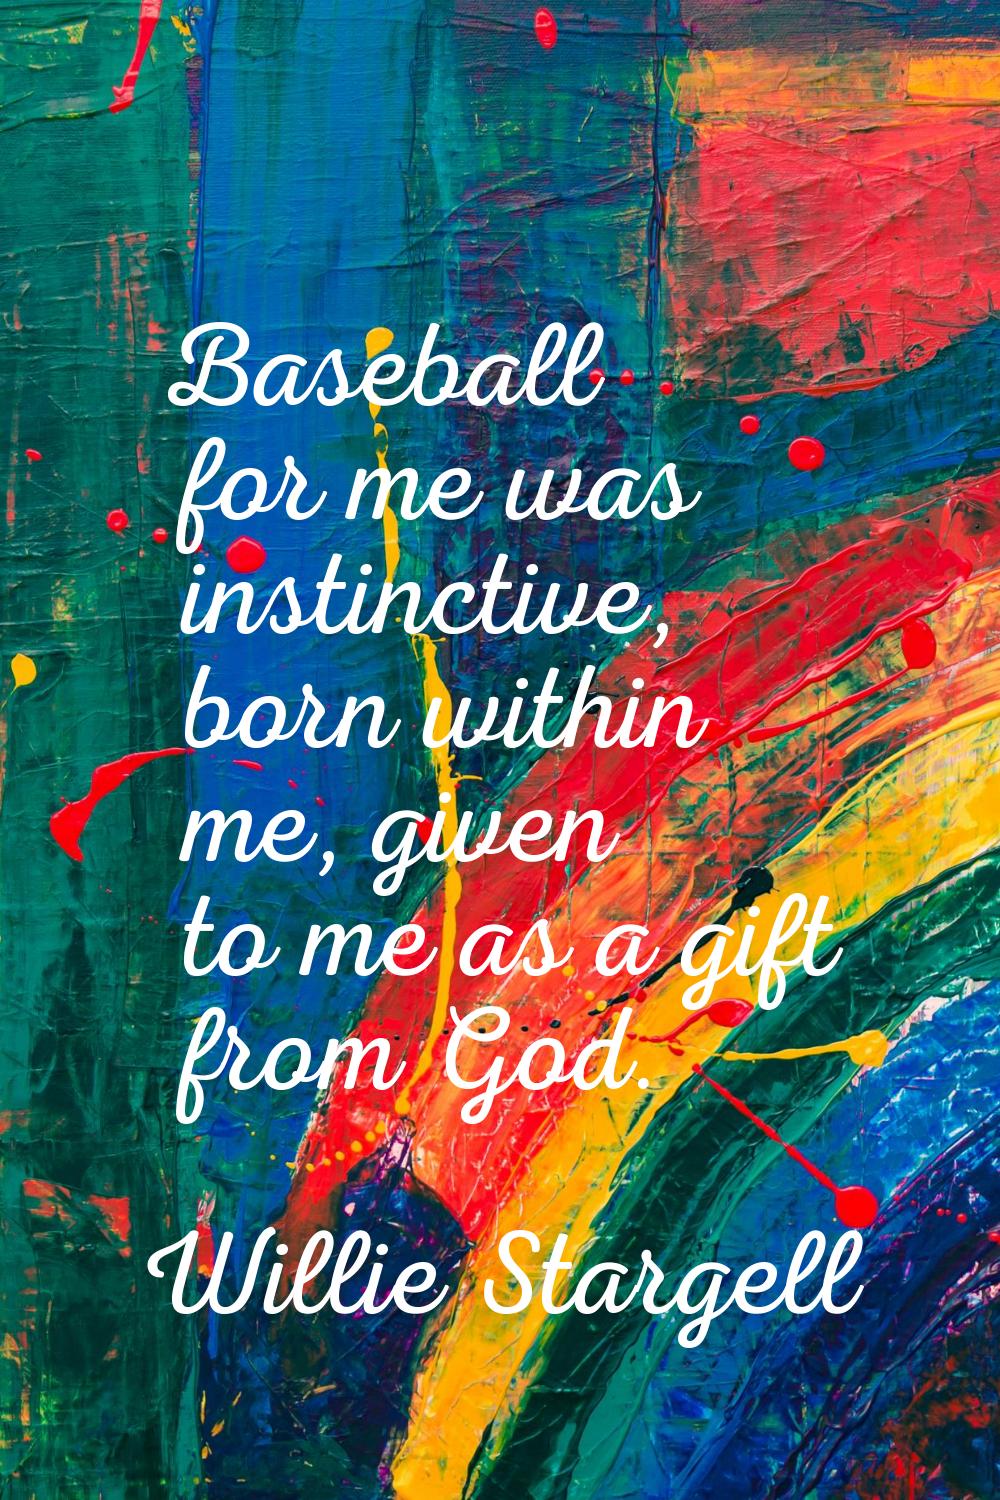 Baseball for me was instinctive, born within me, given to me as a gift from God.